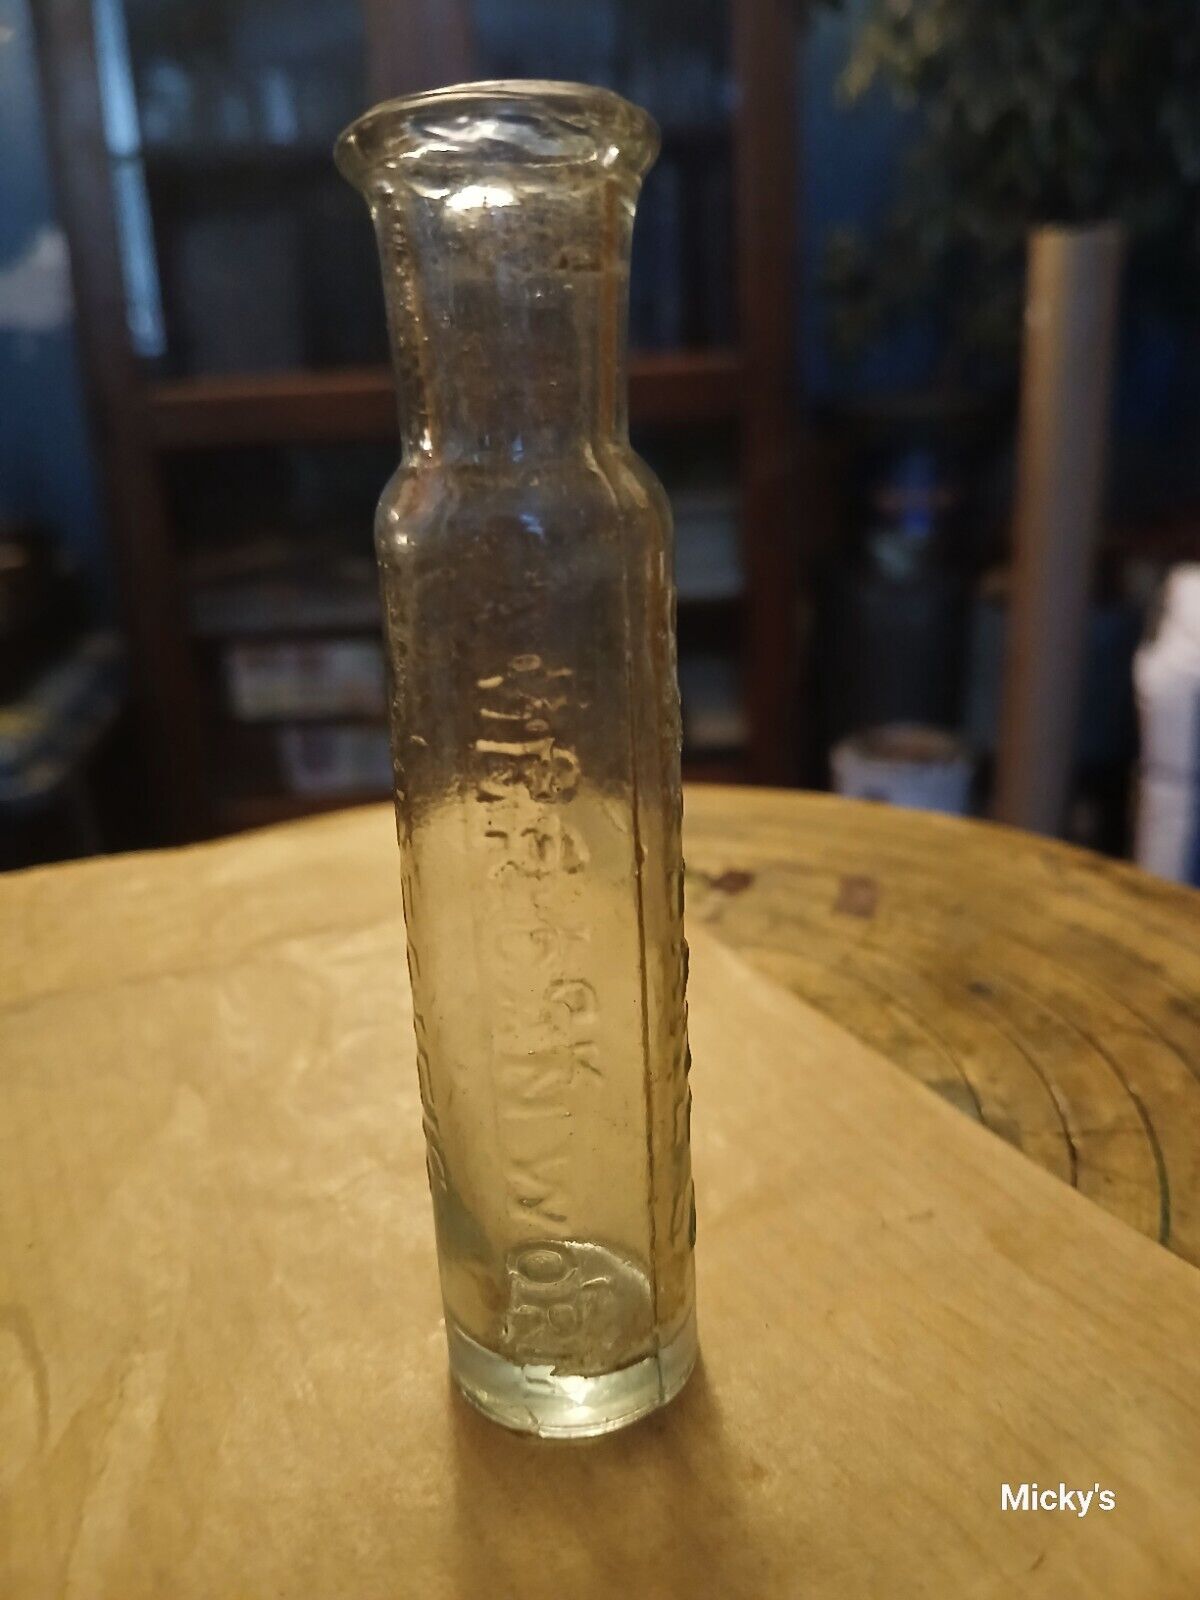 1850s OPEN PONTIL DOCTOR McLANES AMERICAN WORM SPECIFIC BOTTLE. RARE FIND.